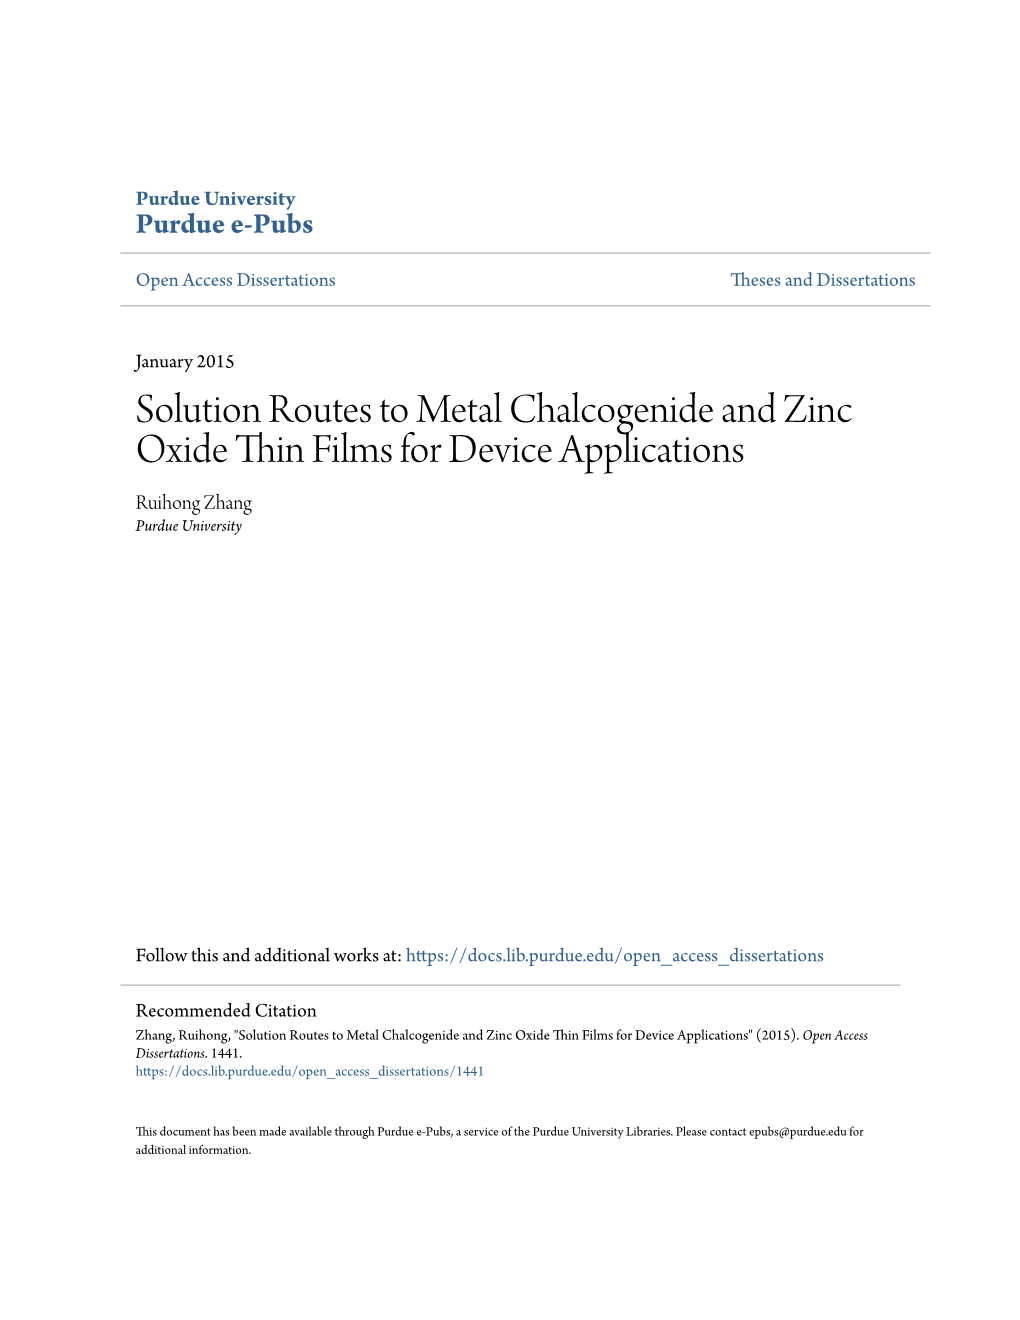 Solution Routes to Metal Chalcogenide and Zinc Oxide Thin Films for Device Applications